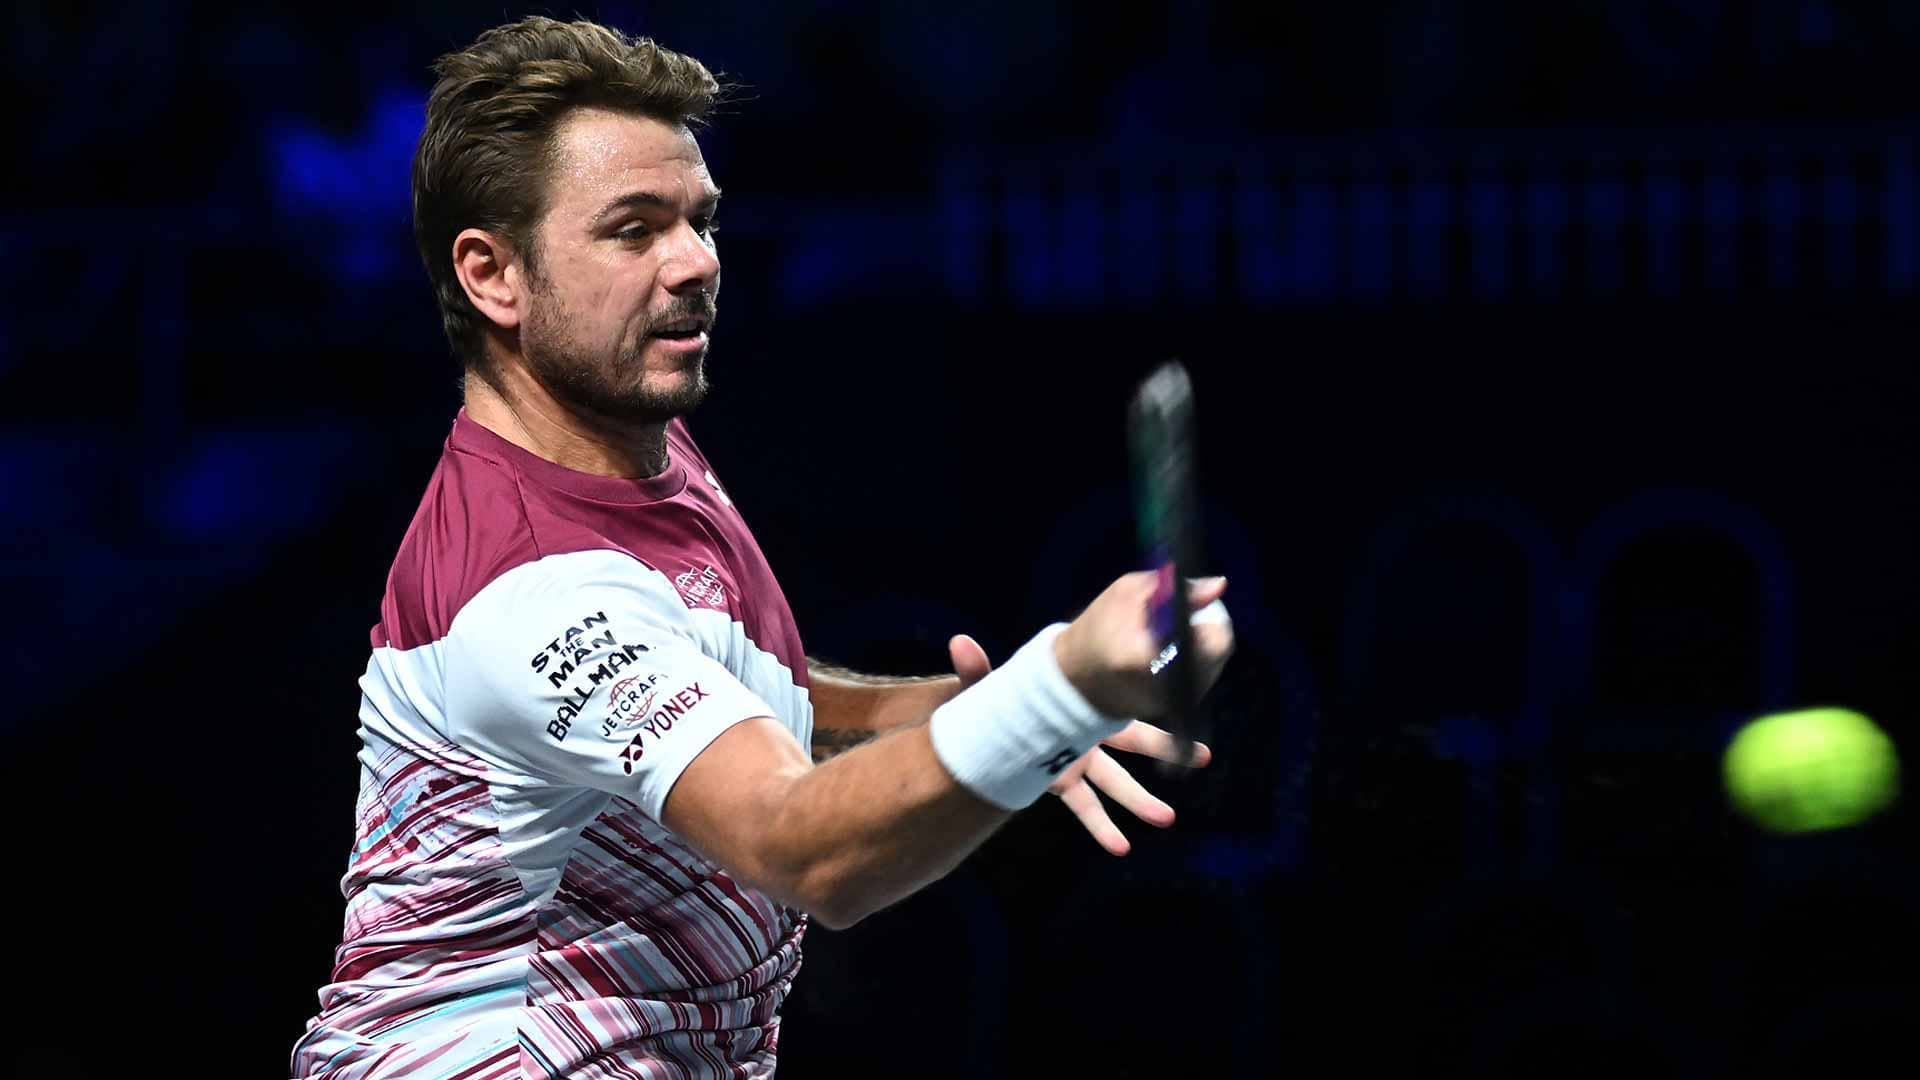 Stan Wawrinka defeats Joao Sousa at the Moselle Open in Metz on Wednesday afternoon.